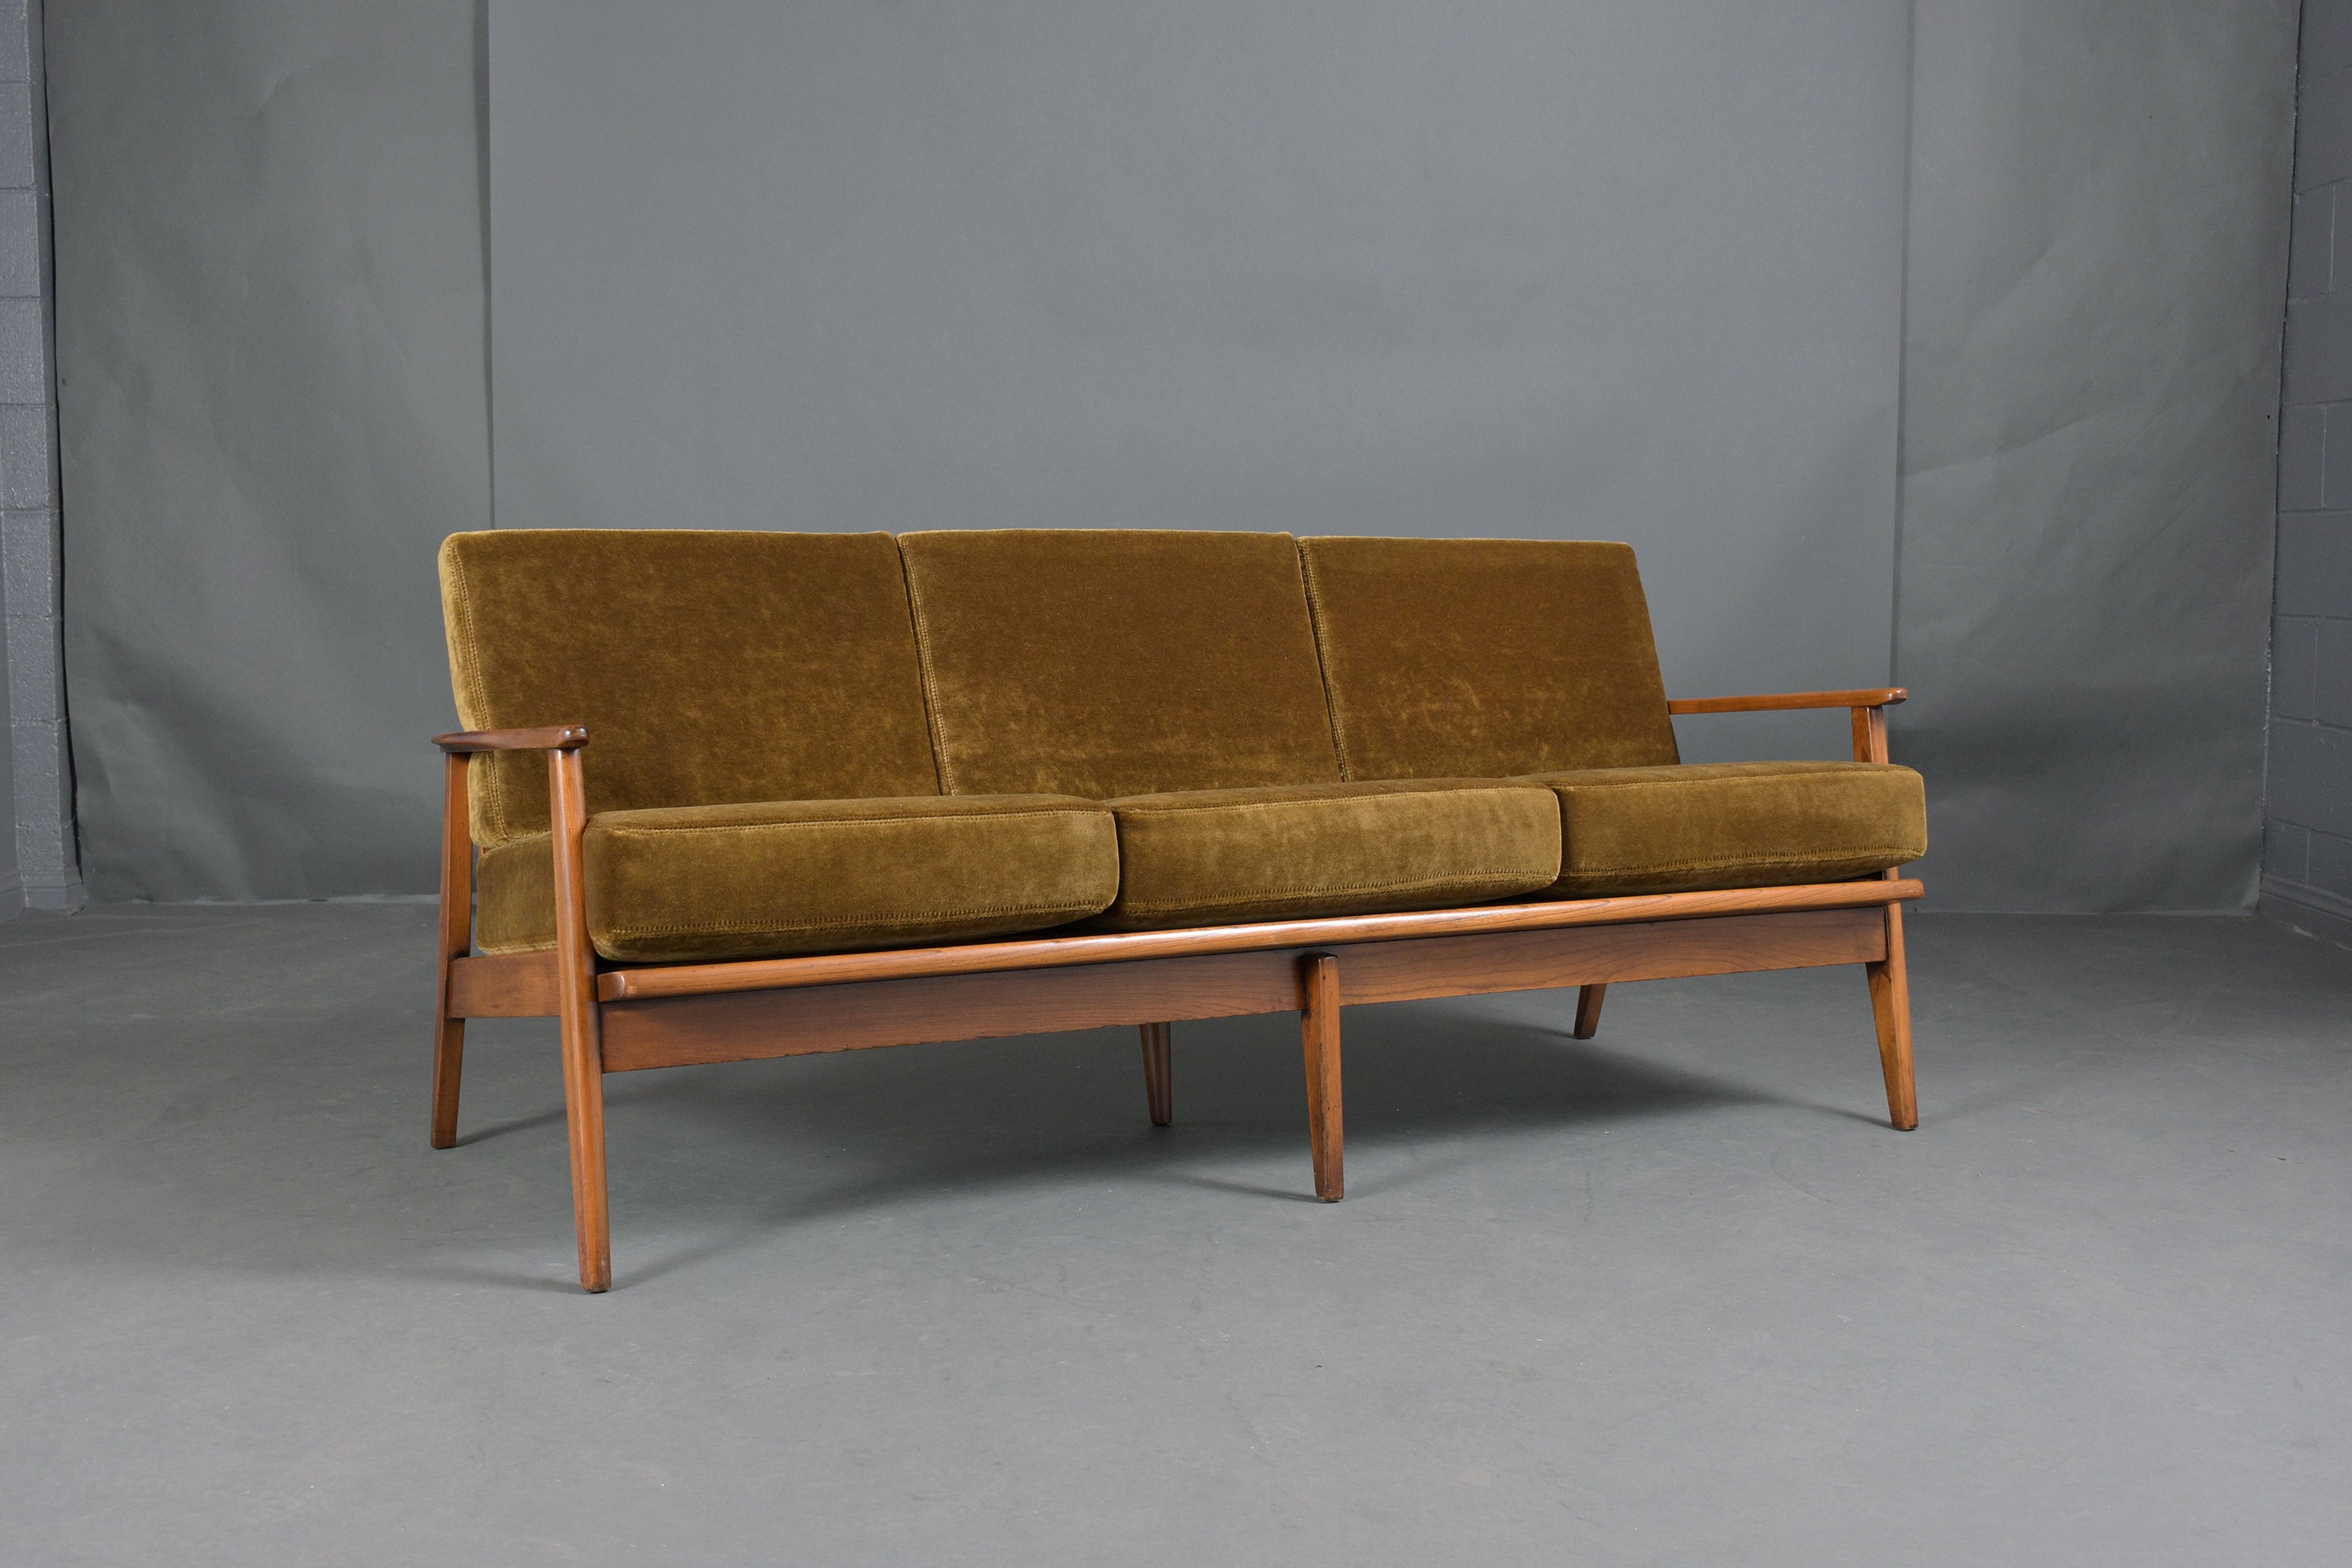 An extraordinary mid-century modern sofa hand-crafted out of solid wood frame with a rich dark walnut color stain with a lacquered finish and is professionally restored by our craftsmen team. This fabulous sofa features sculpted slatted backrests,